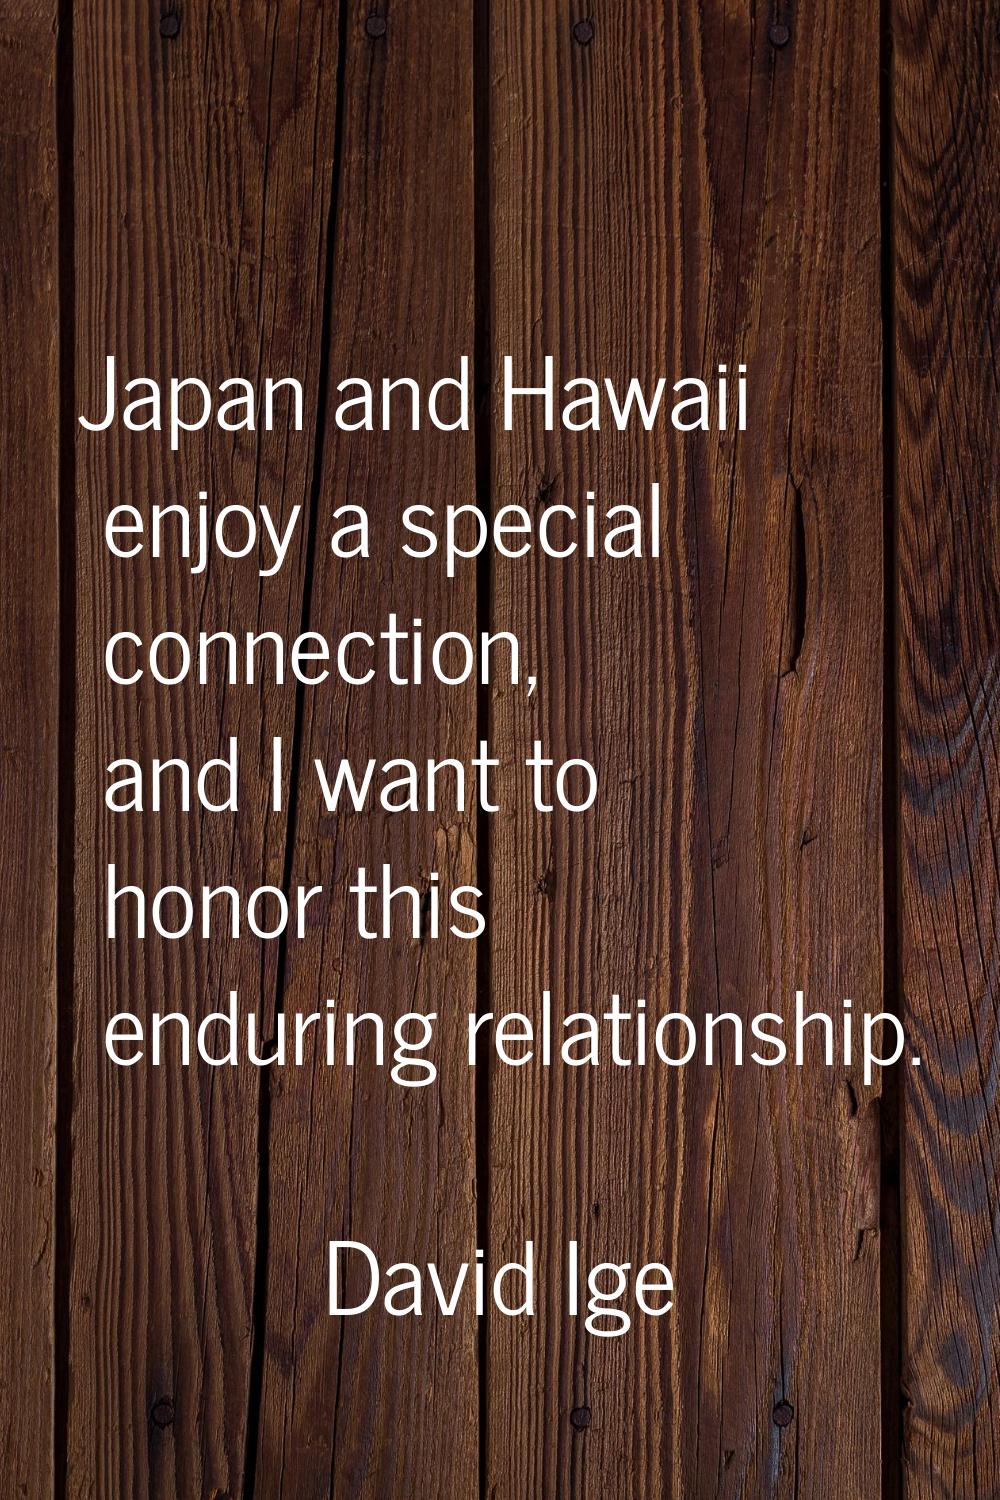 Japan and Hawaii enjoy a special connection, and I want to honor this enduring relationship.